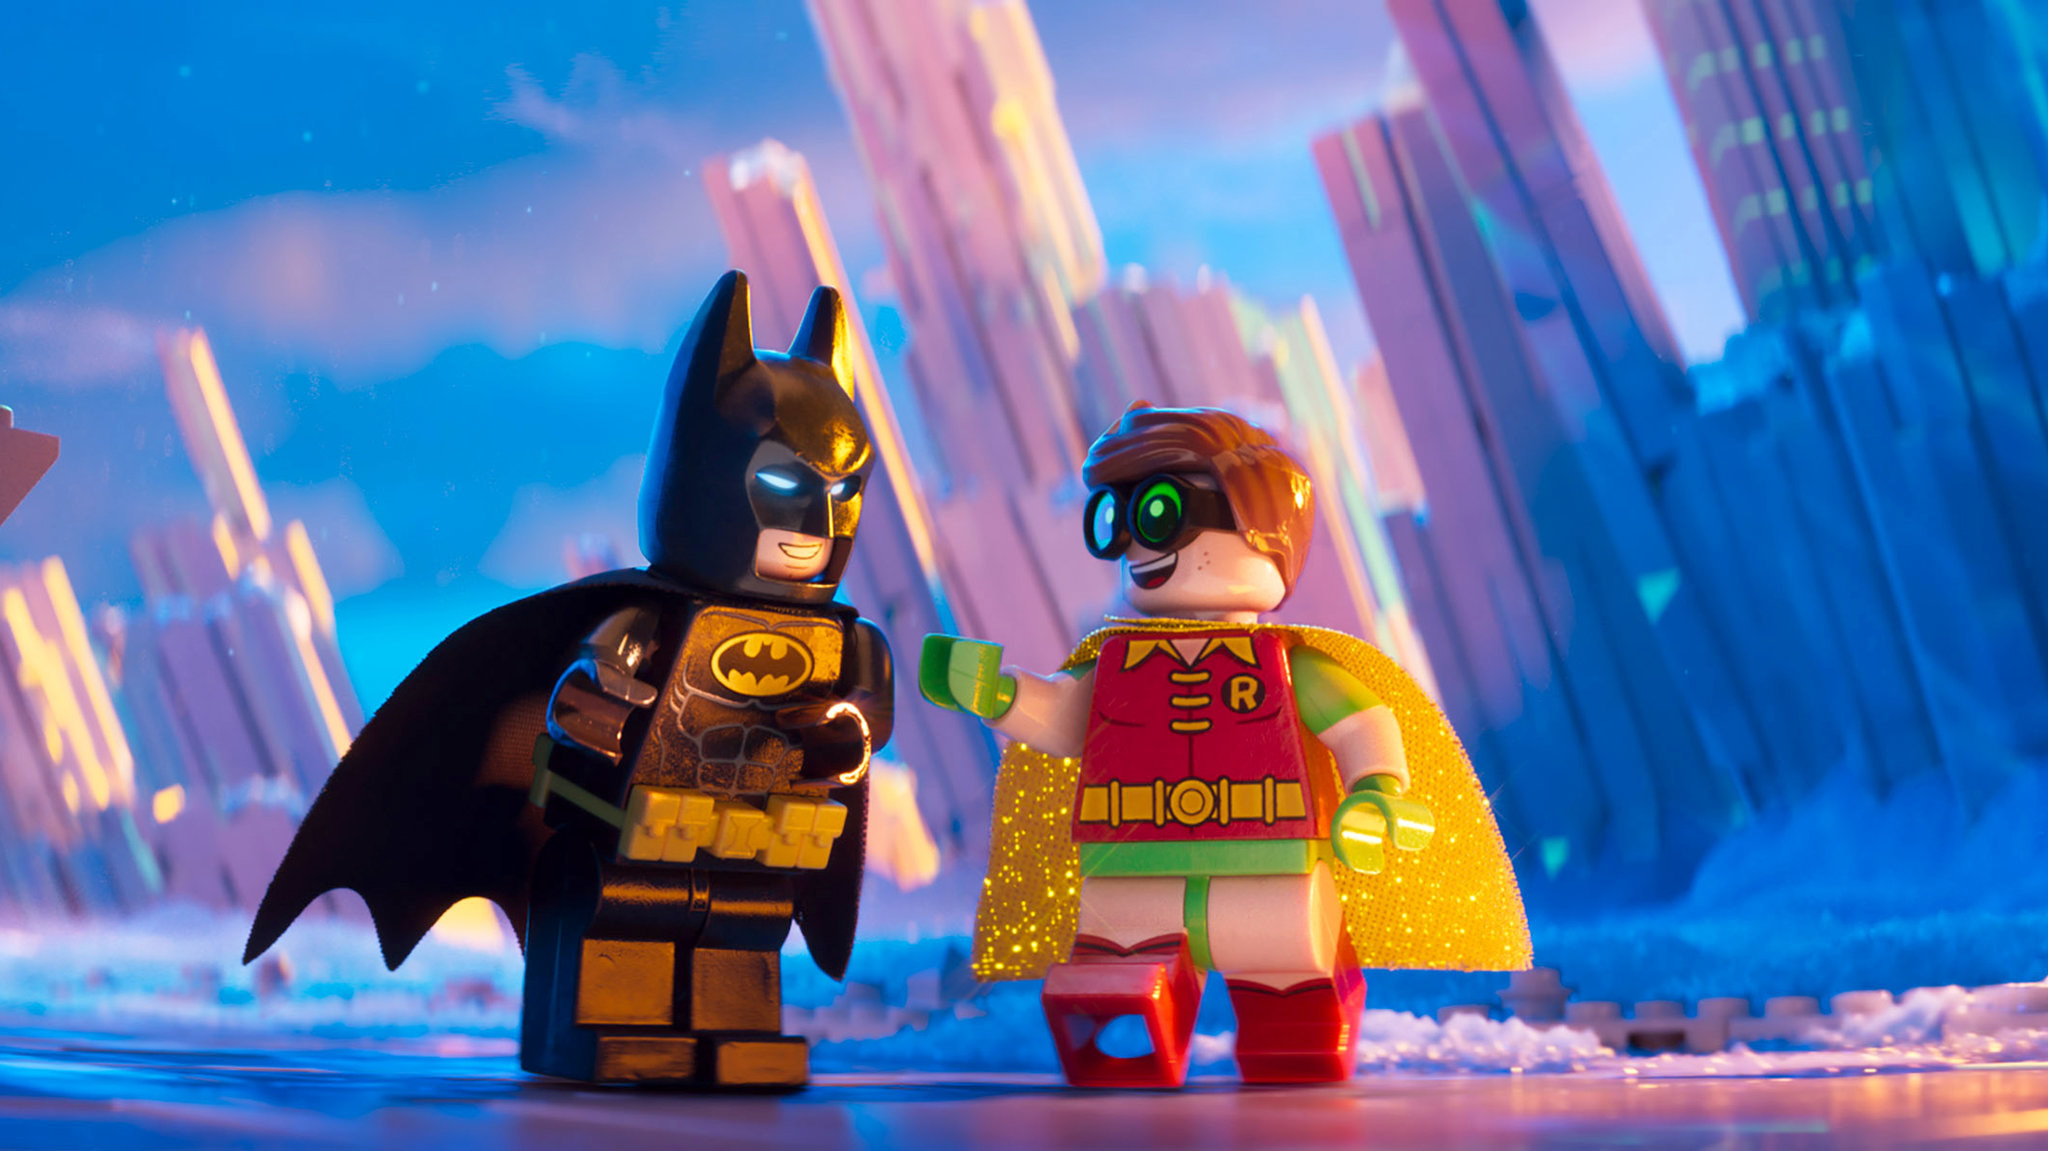 A lego-shaped Batman and Robin interacting with each other